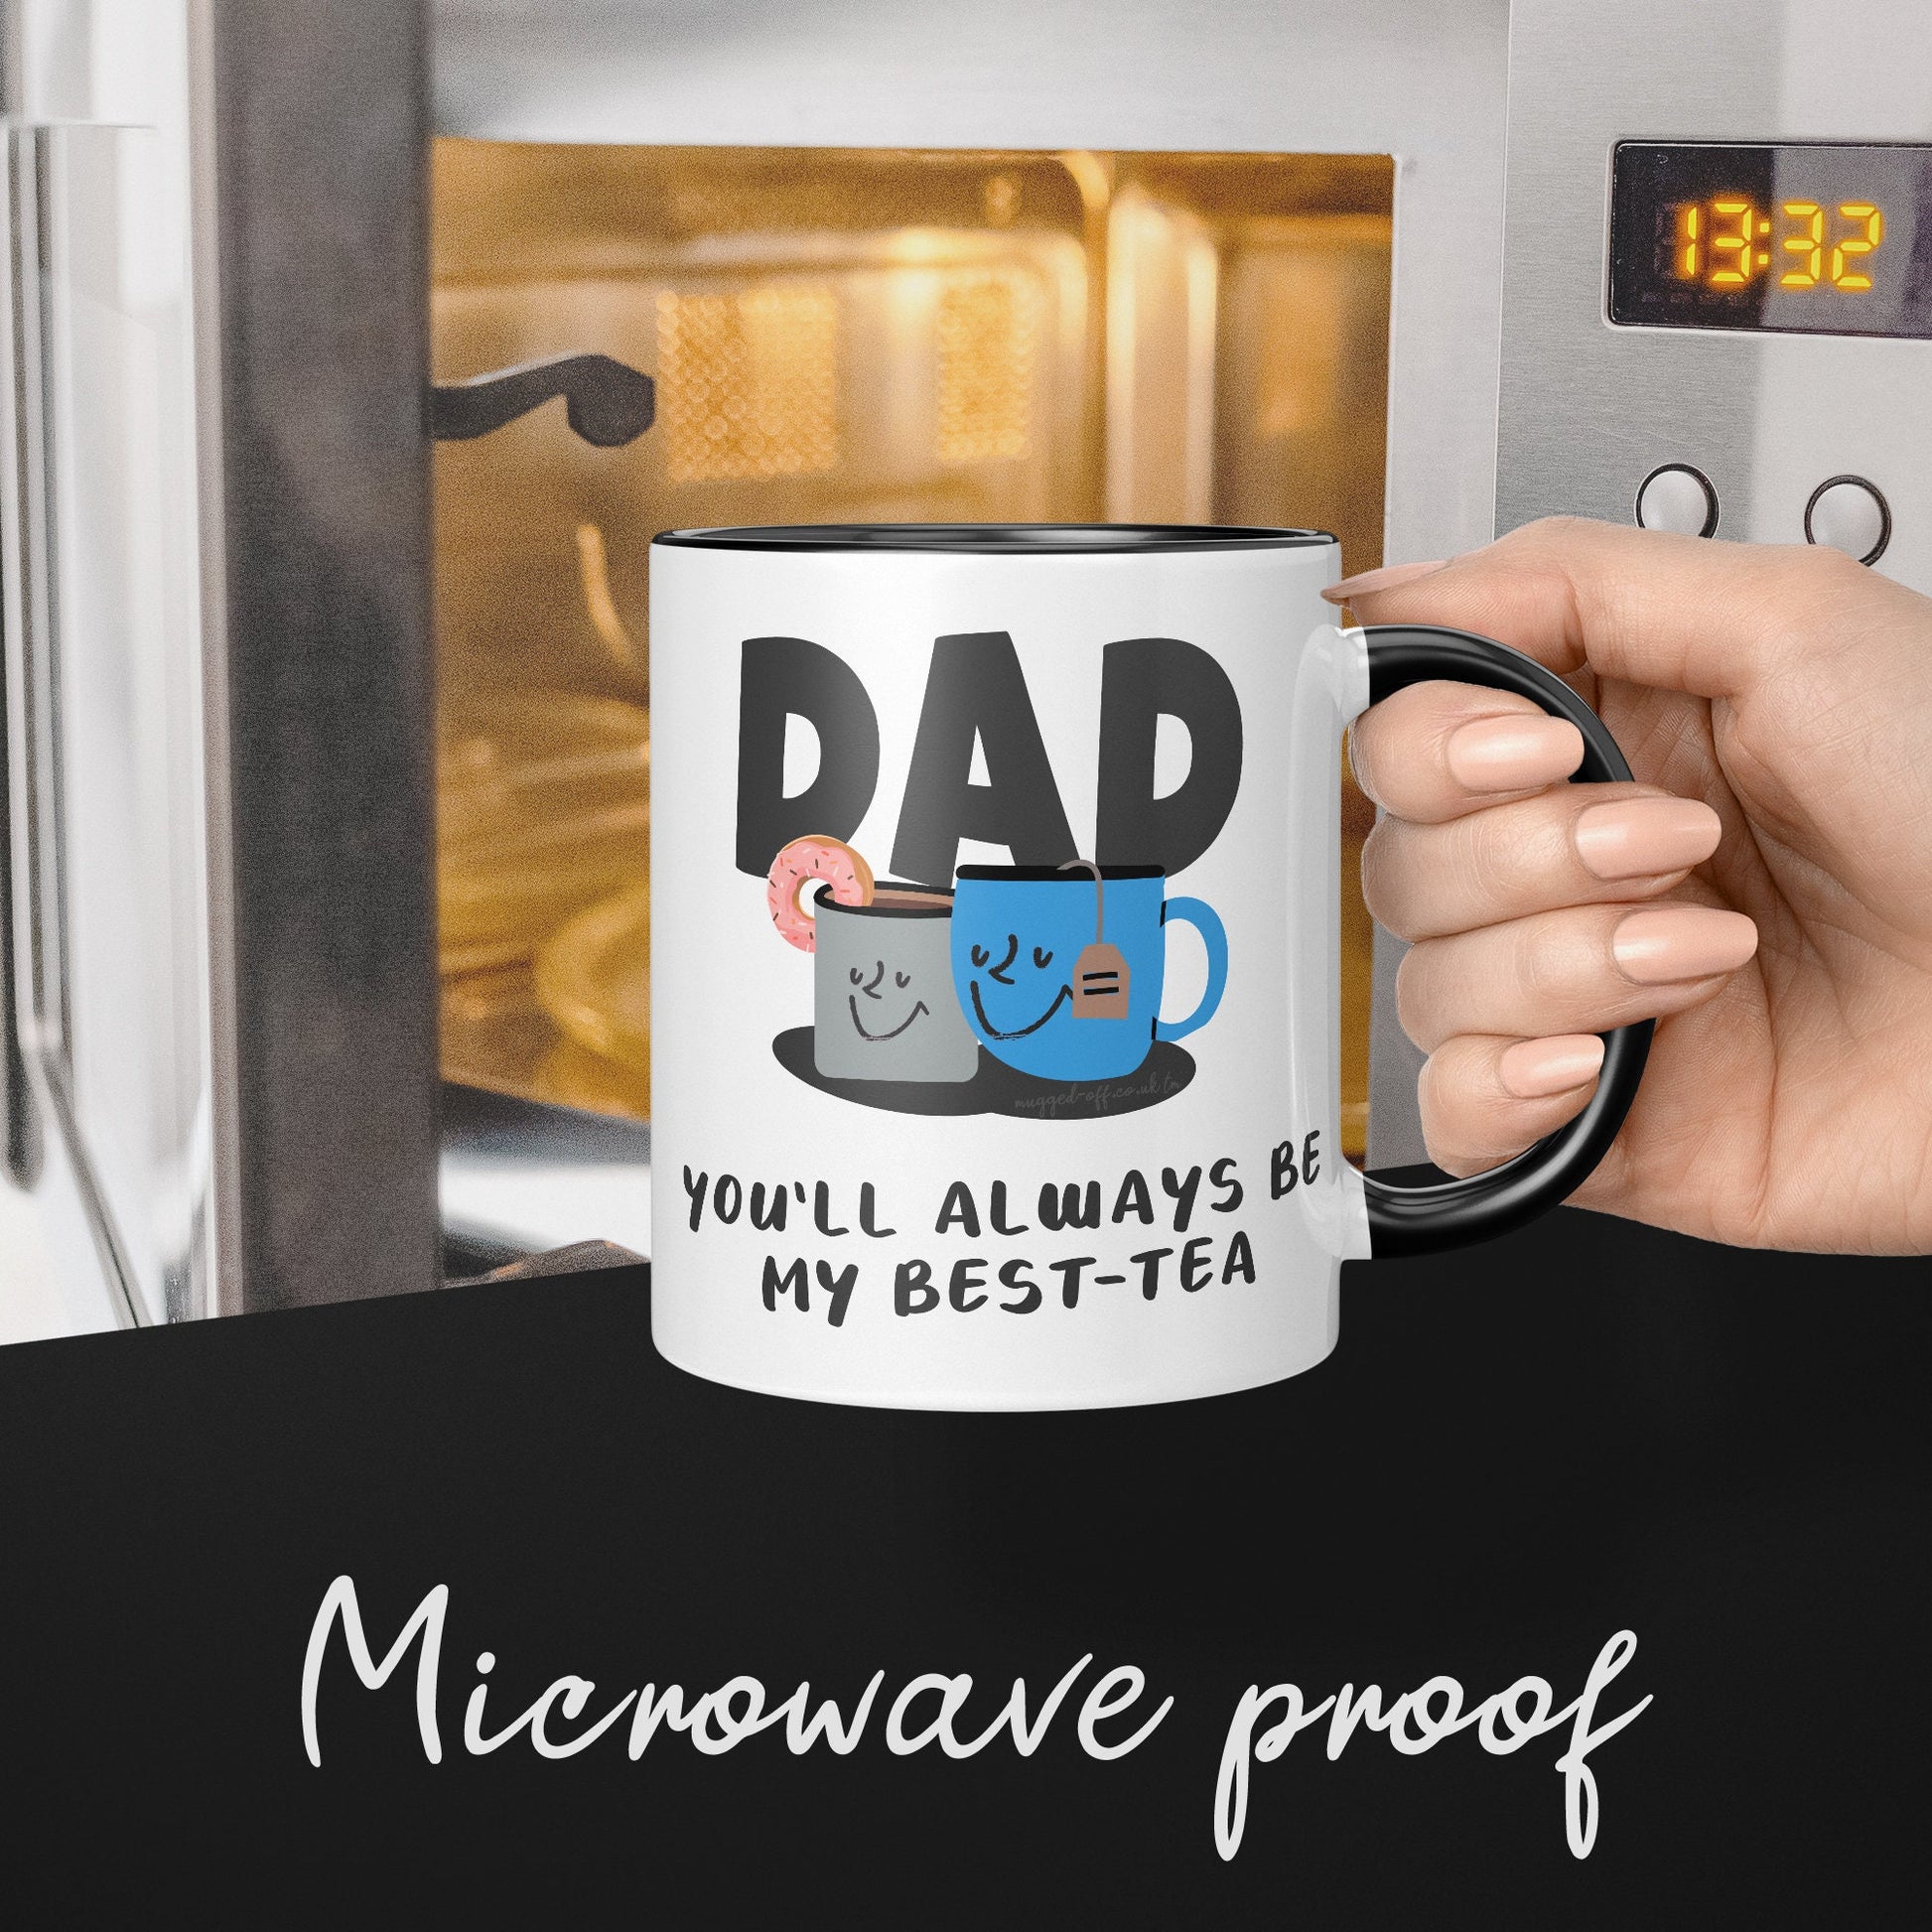 35 Hilarious Gag Gifts for Dad That Help Ease Some Pressure – Loveable